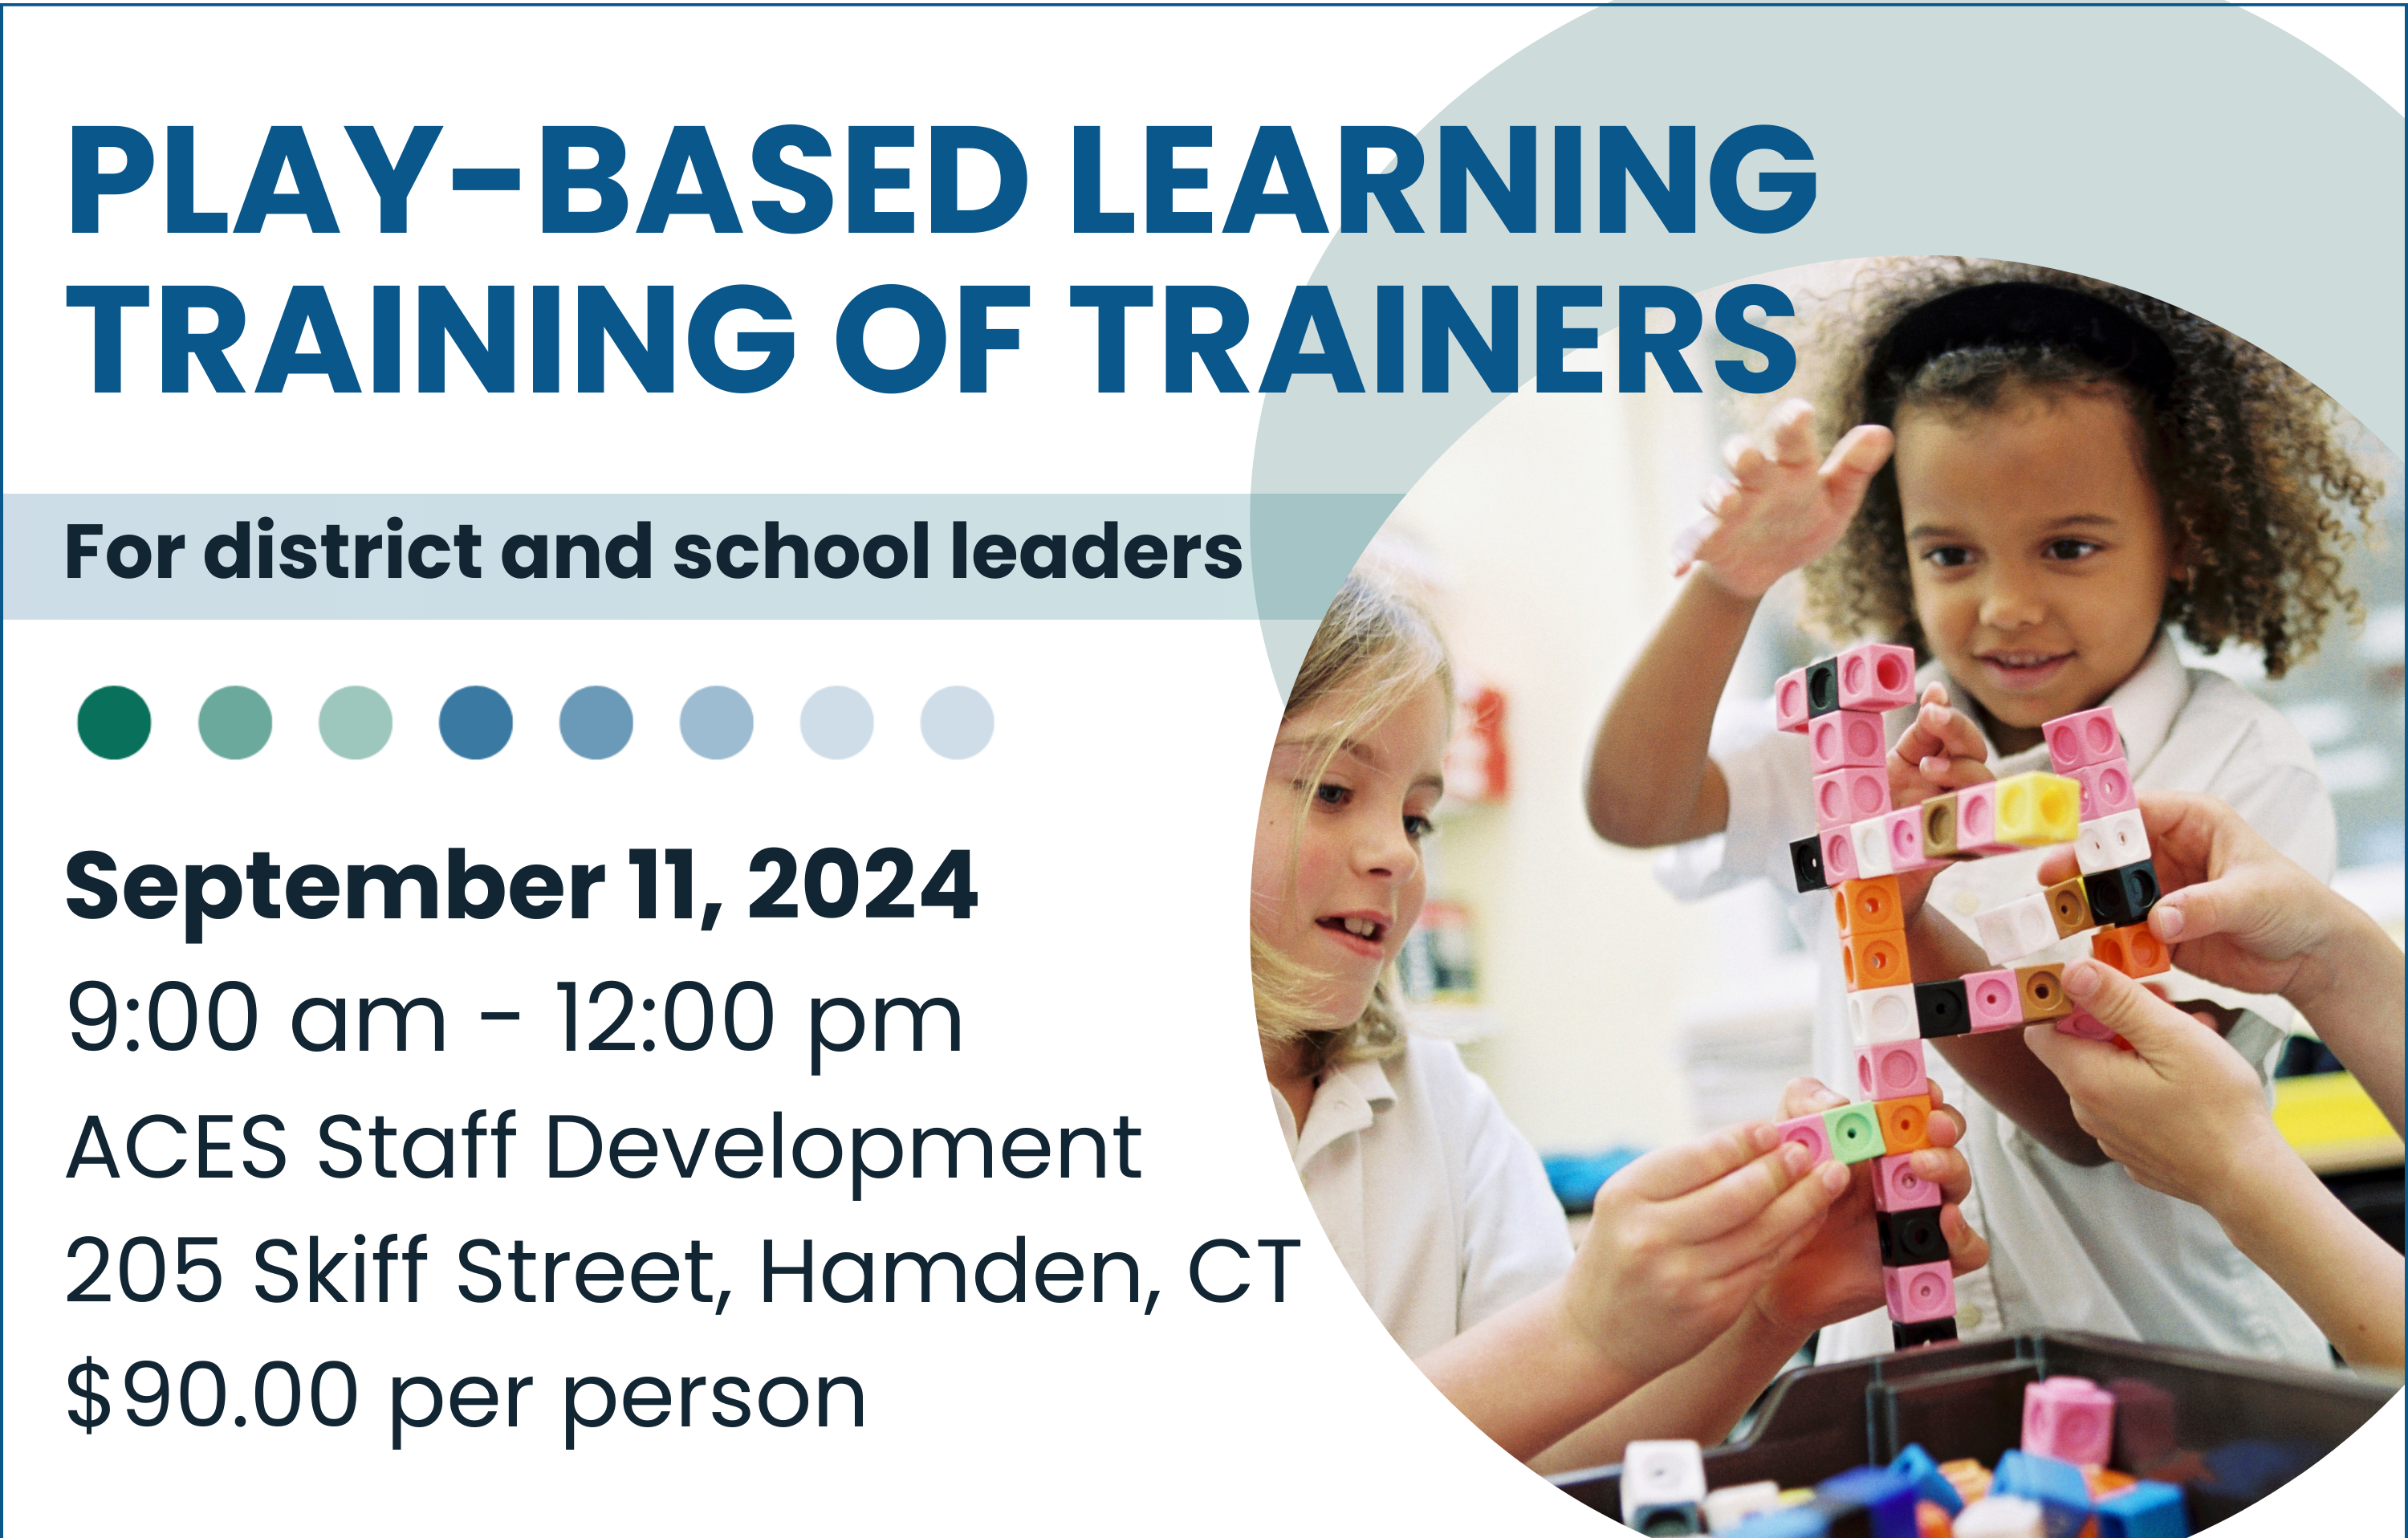 Register for the Play-Based Learning Training of Trainers